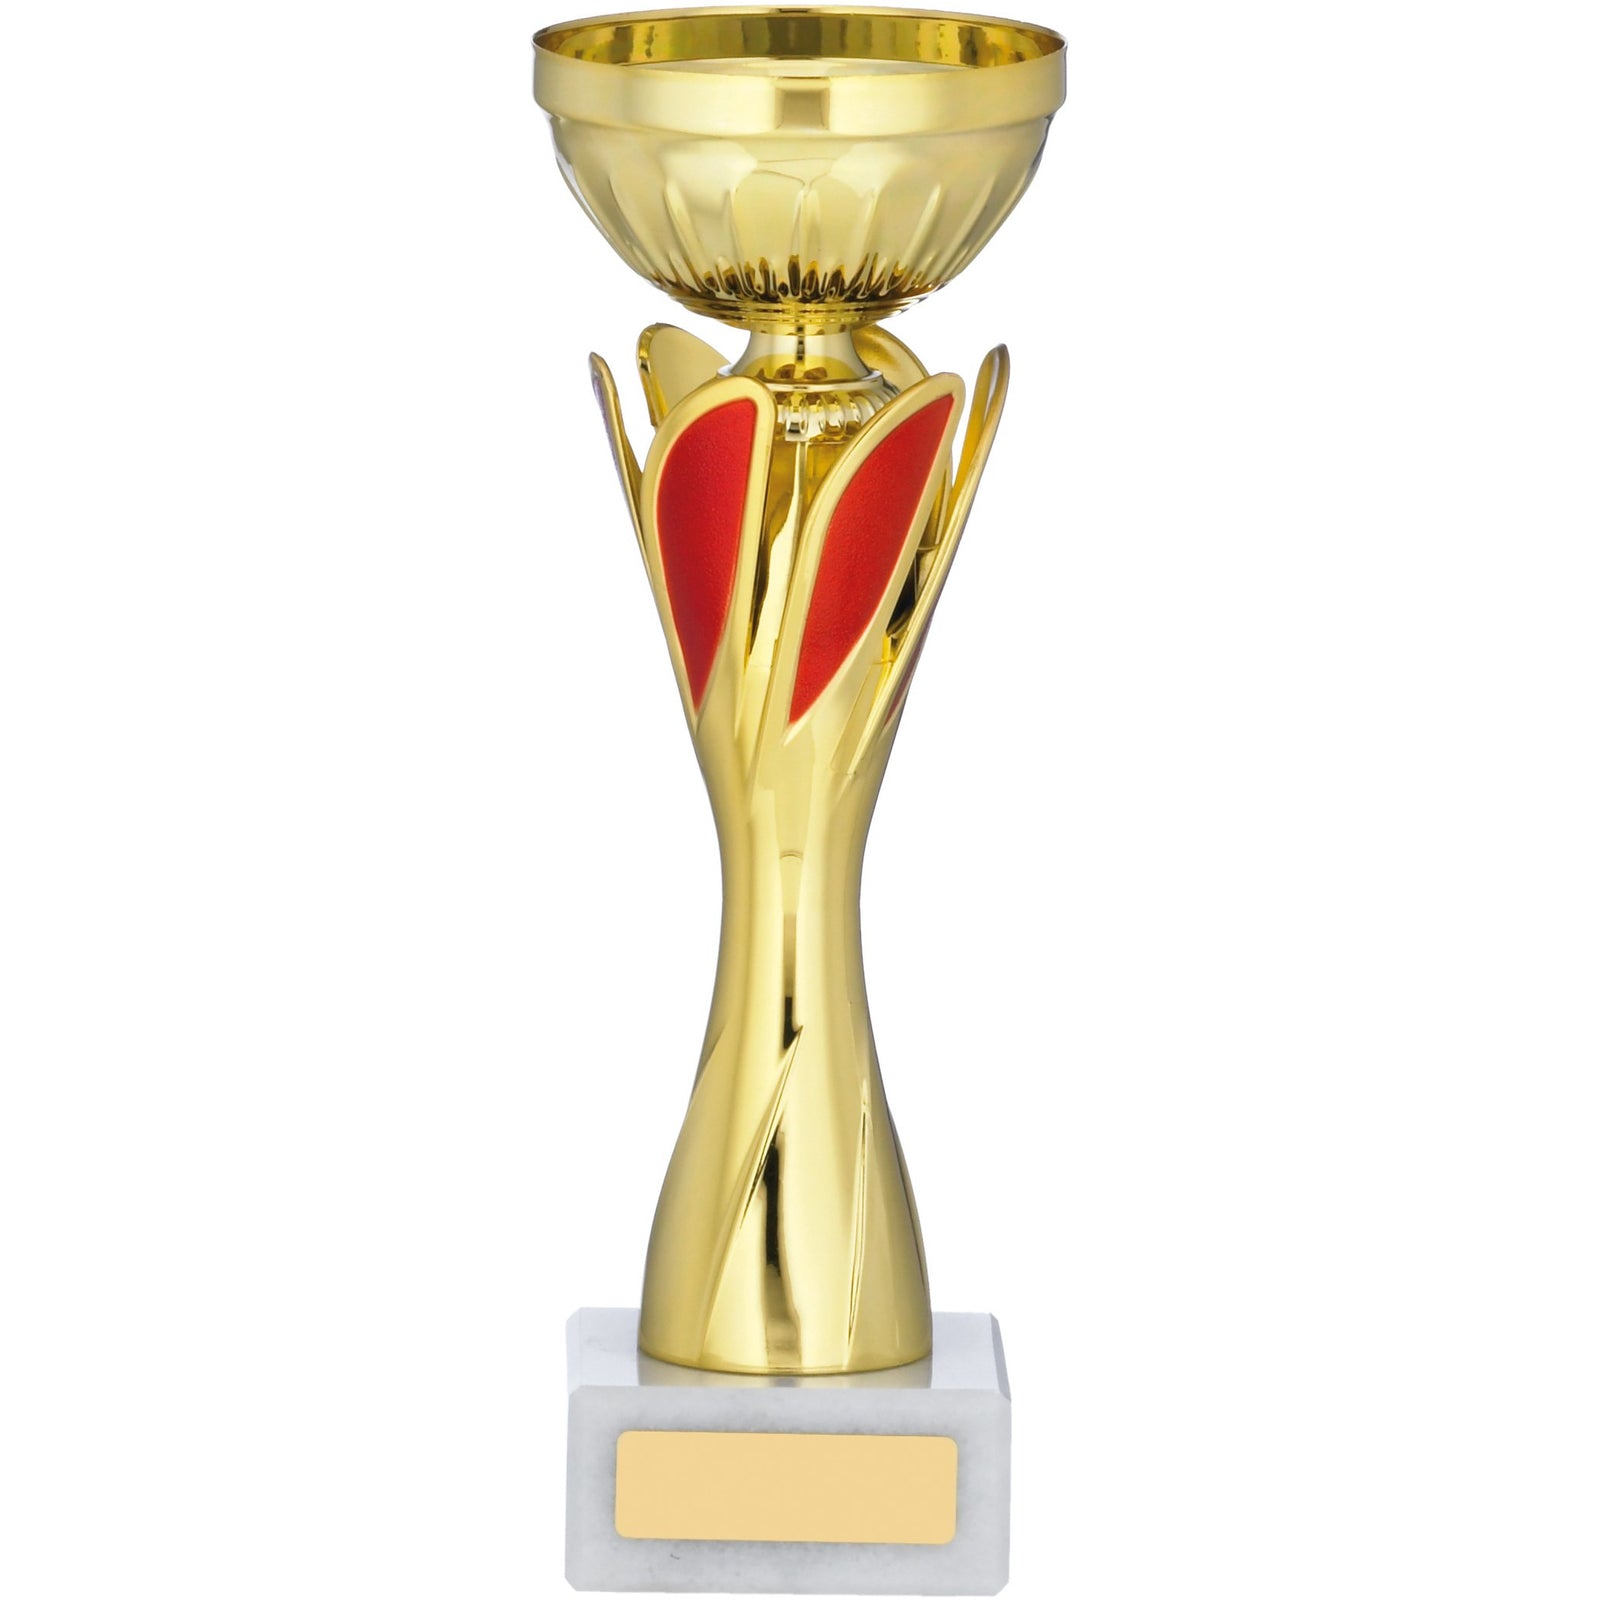 Gold And Red Wreath Crown Cup Trophy